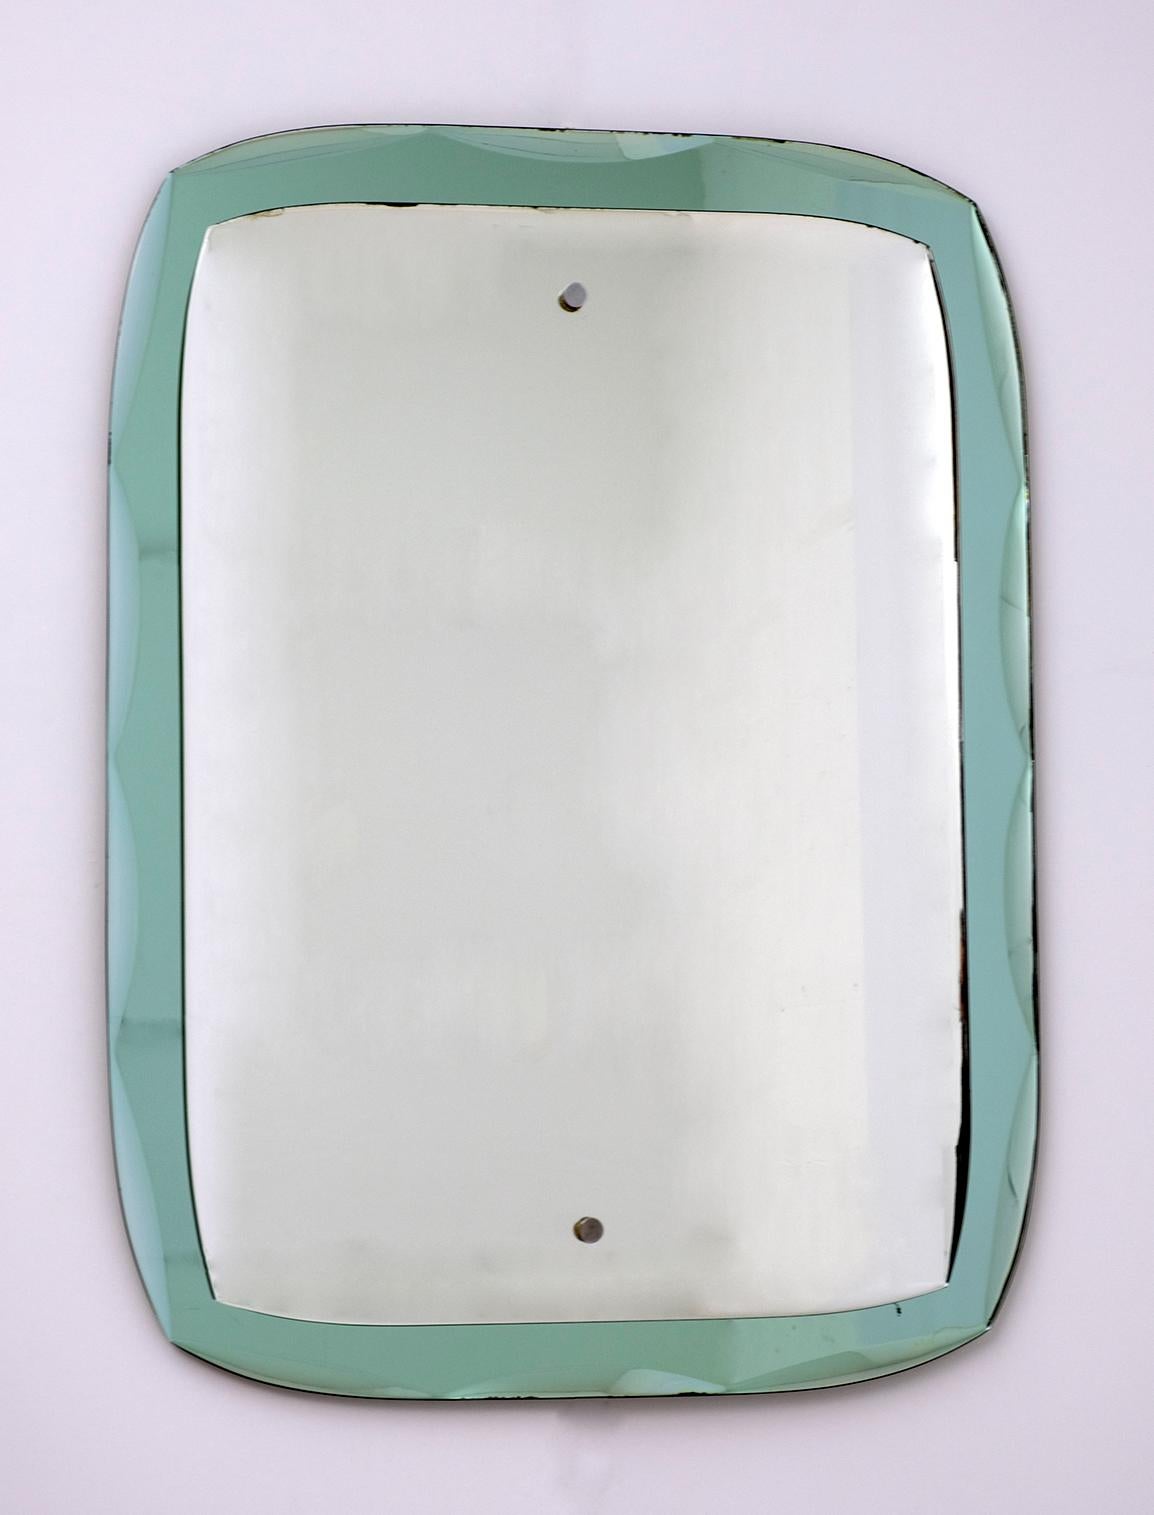 This heavy wall mirror features the green beveled mirror and the traditional mirror always with the grinding, typical of the Fontana Arte production. It has time spots on the edges but this does not diminish the quality of the mirror.

Fontana